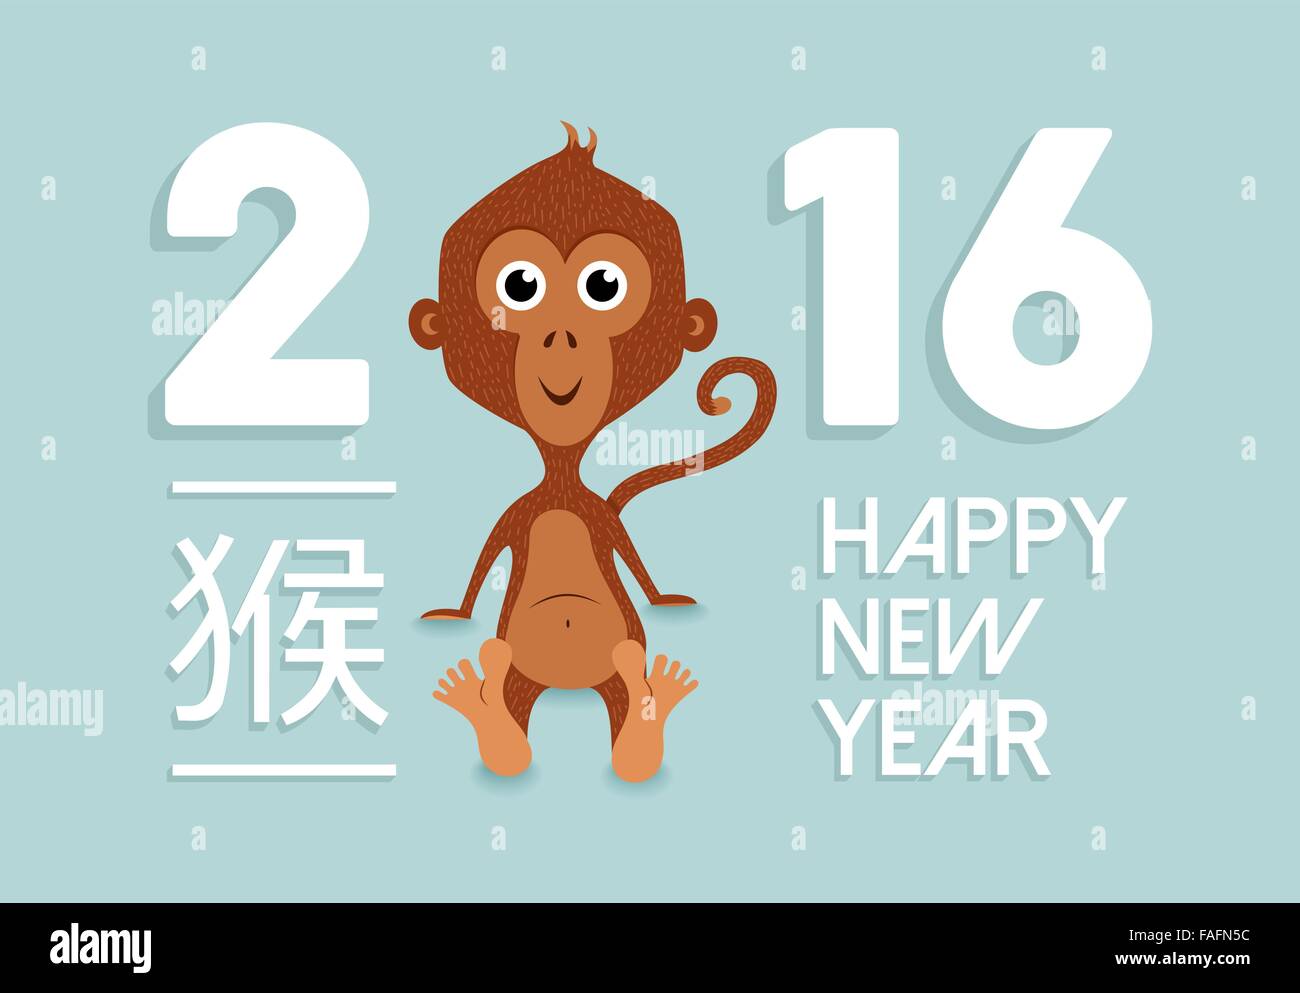 2016 Happy Chinese New Year of the Monkey. Cute ape illustration with traditional calligraphy text. EPS10 vector. Stock Vector